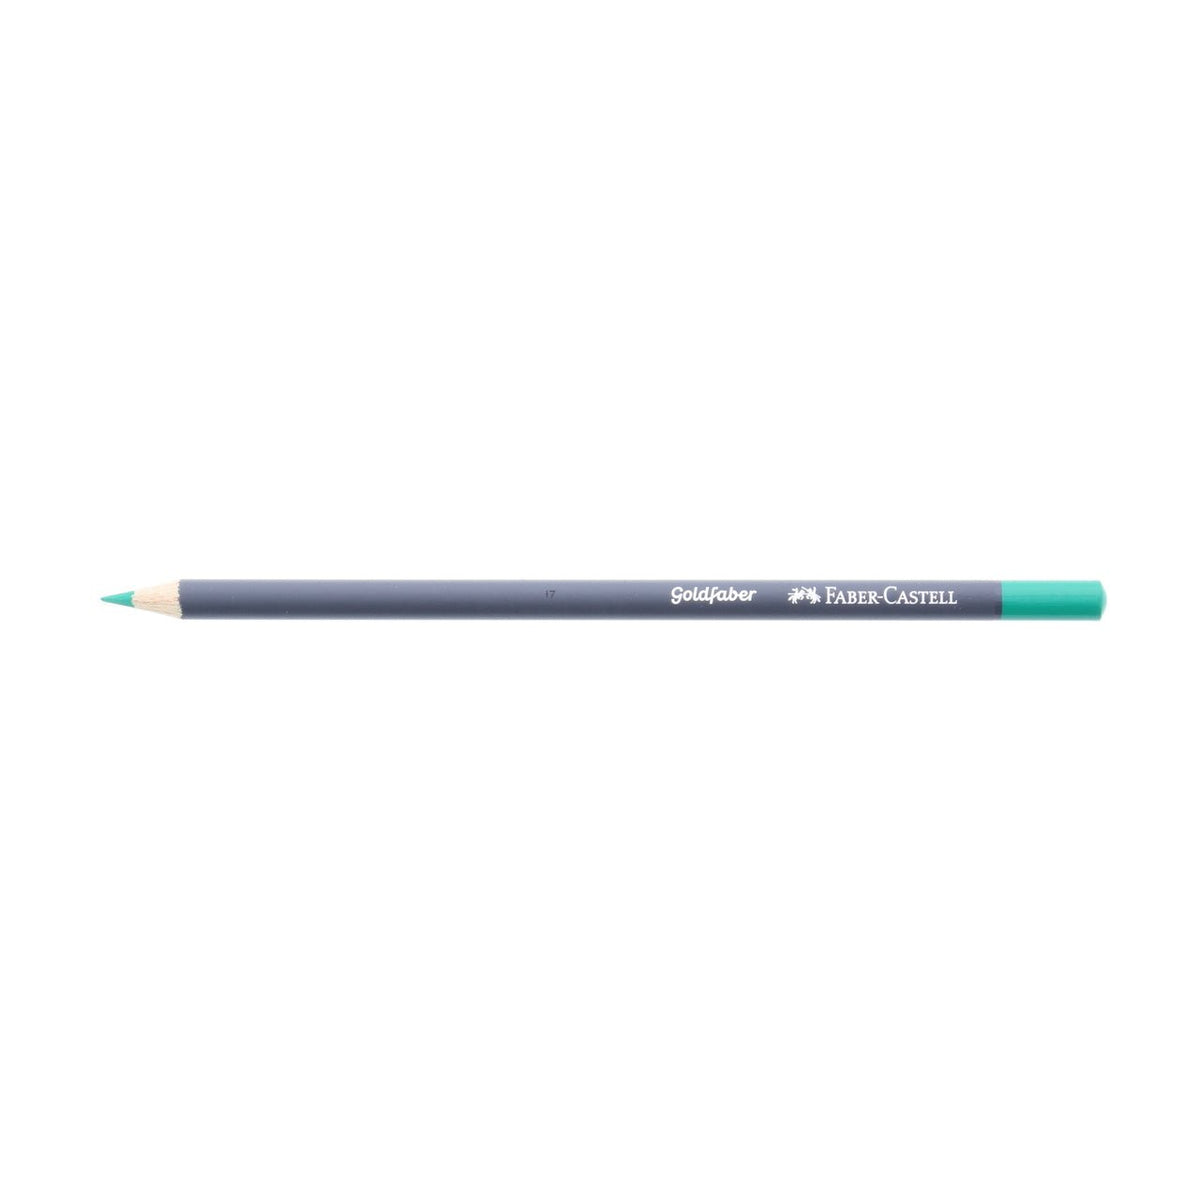 Goldfaber Colored Pencil 161 Pthalo Green - merriartist.com